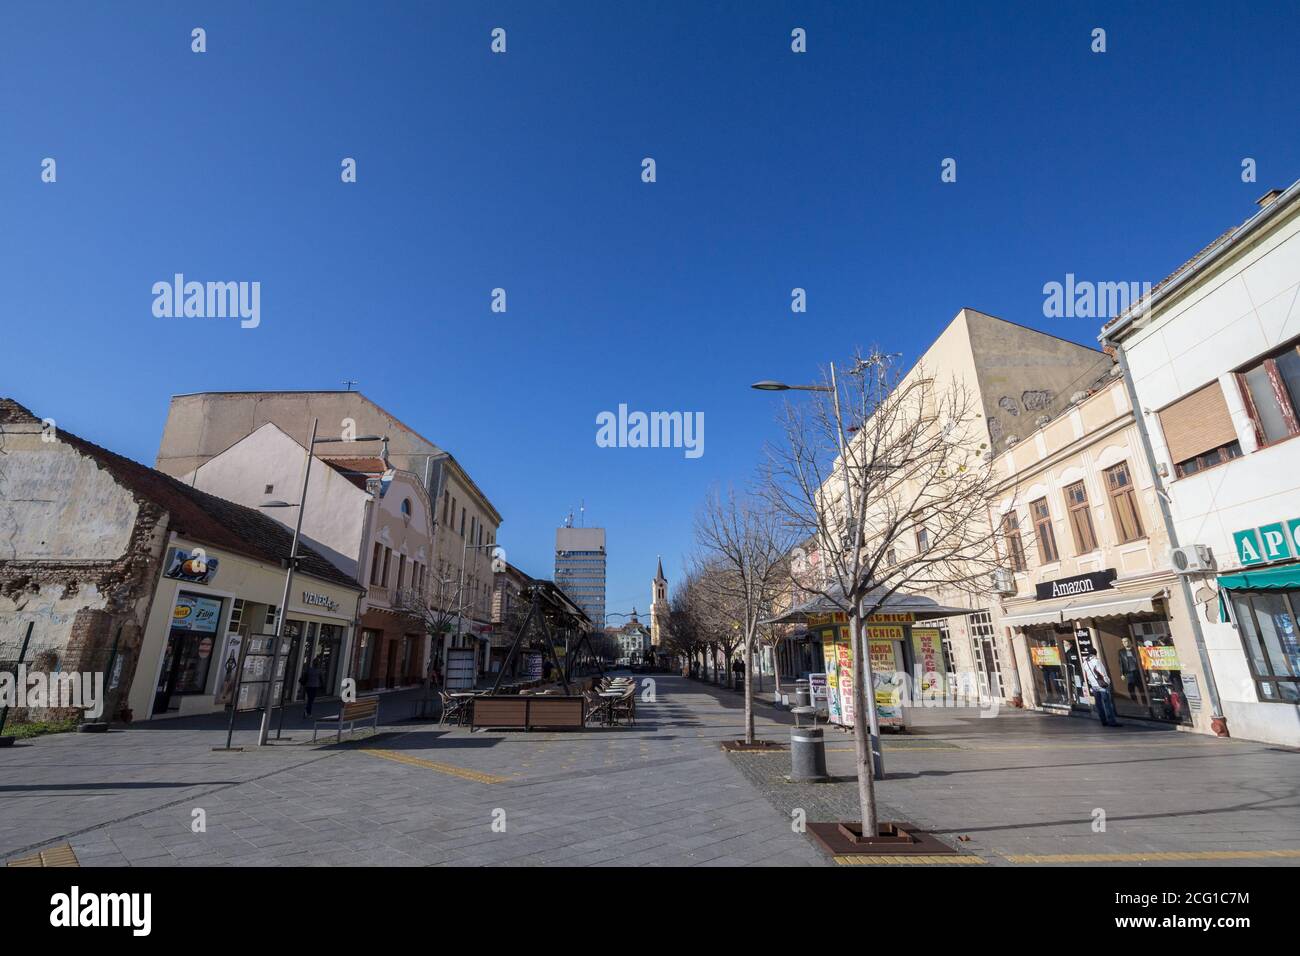 Zrenjanin Serbia High Resolution Stock Photography and Images - Alamy